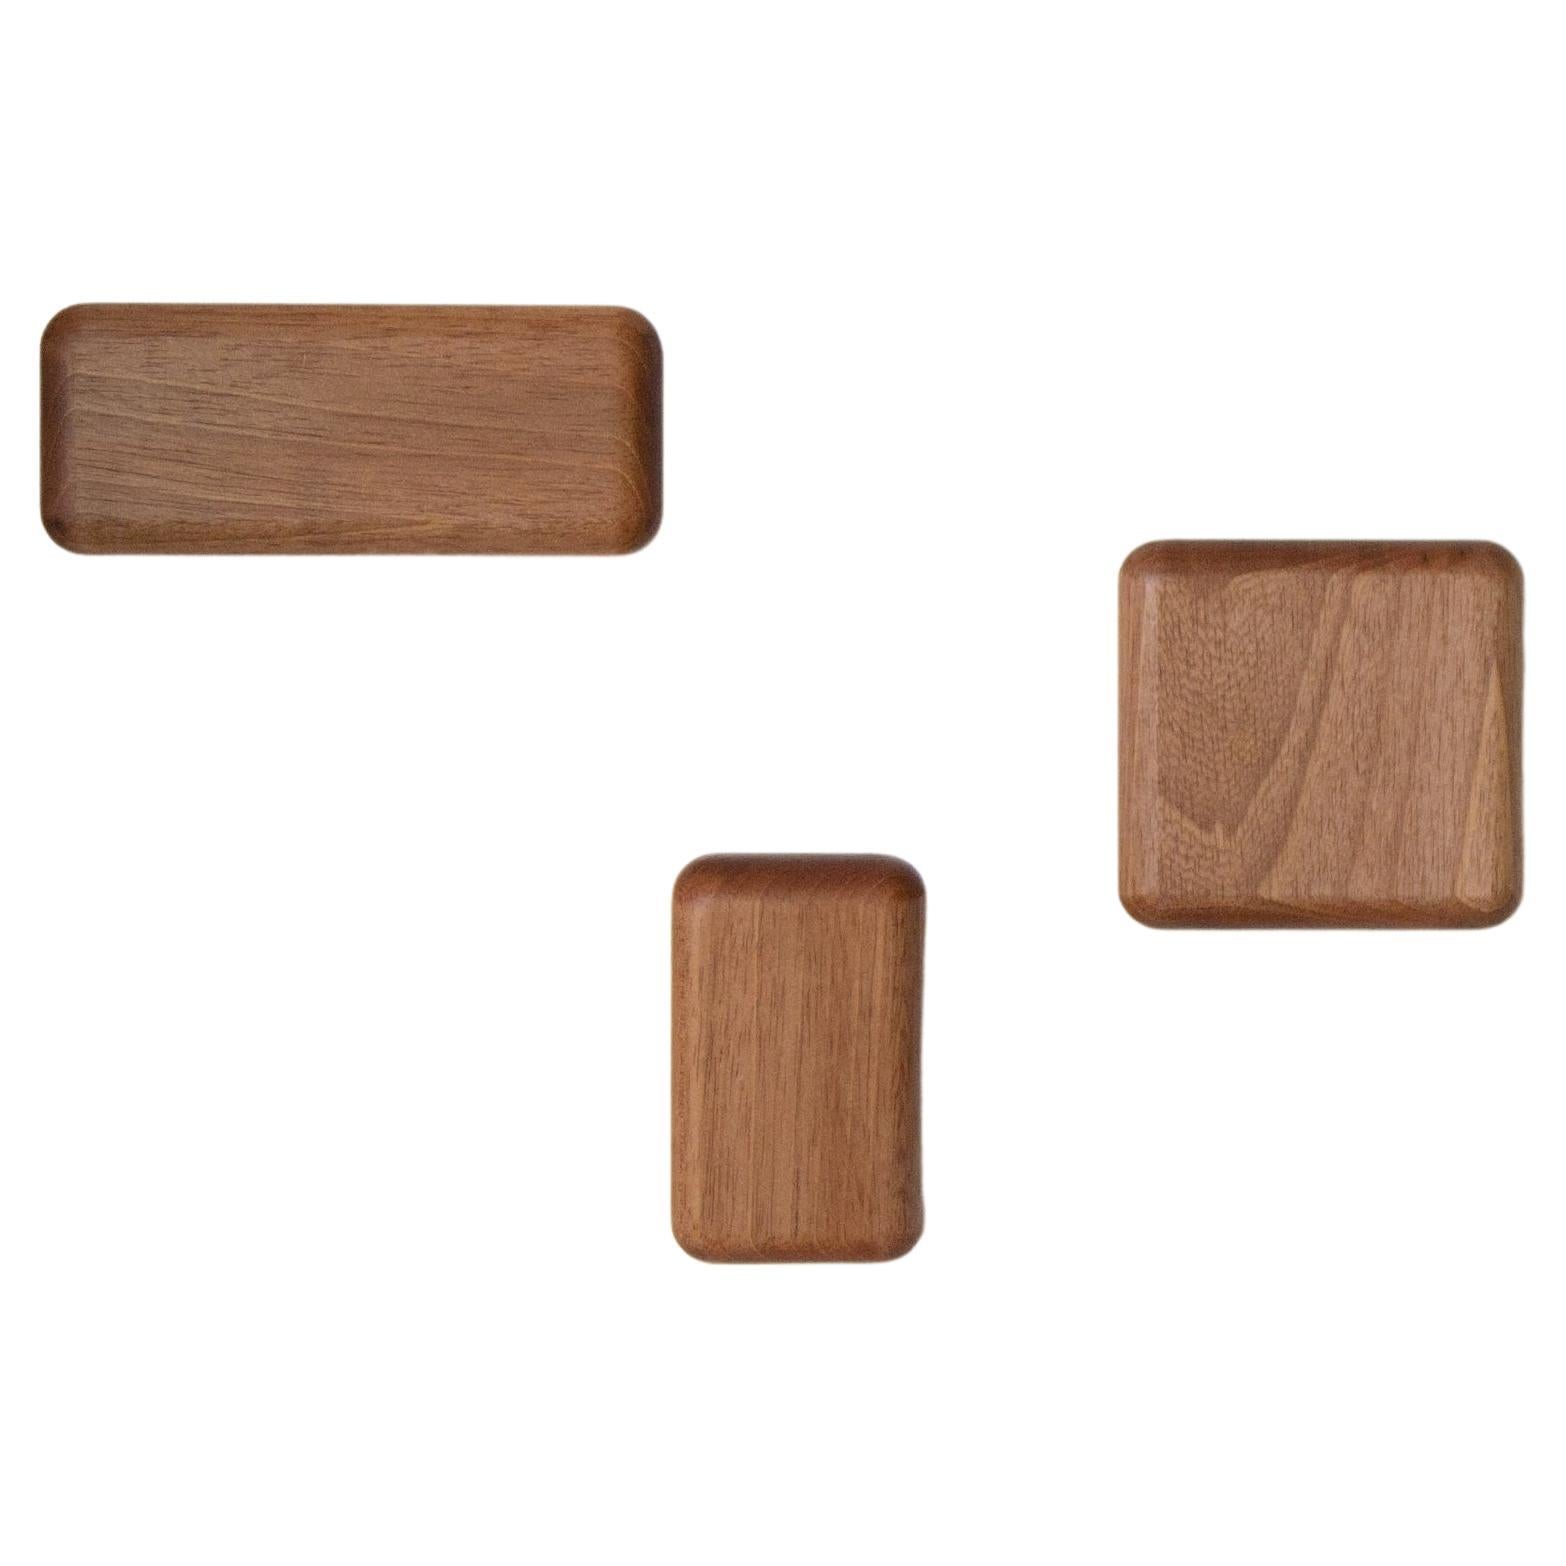 Edros Wall Hanger 03 pieces — Handmade Solid Wood Contemporary Brazilian Design For Sale